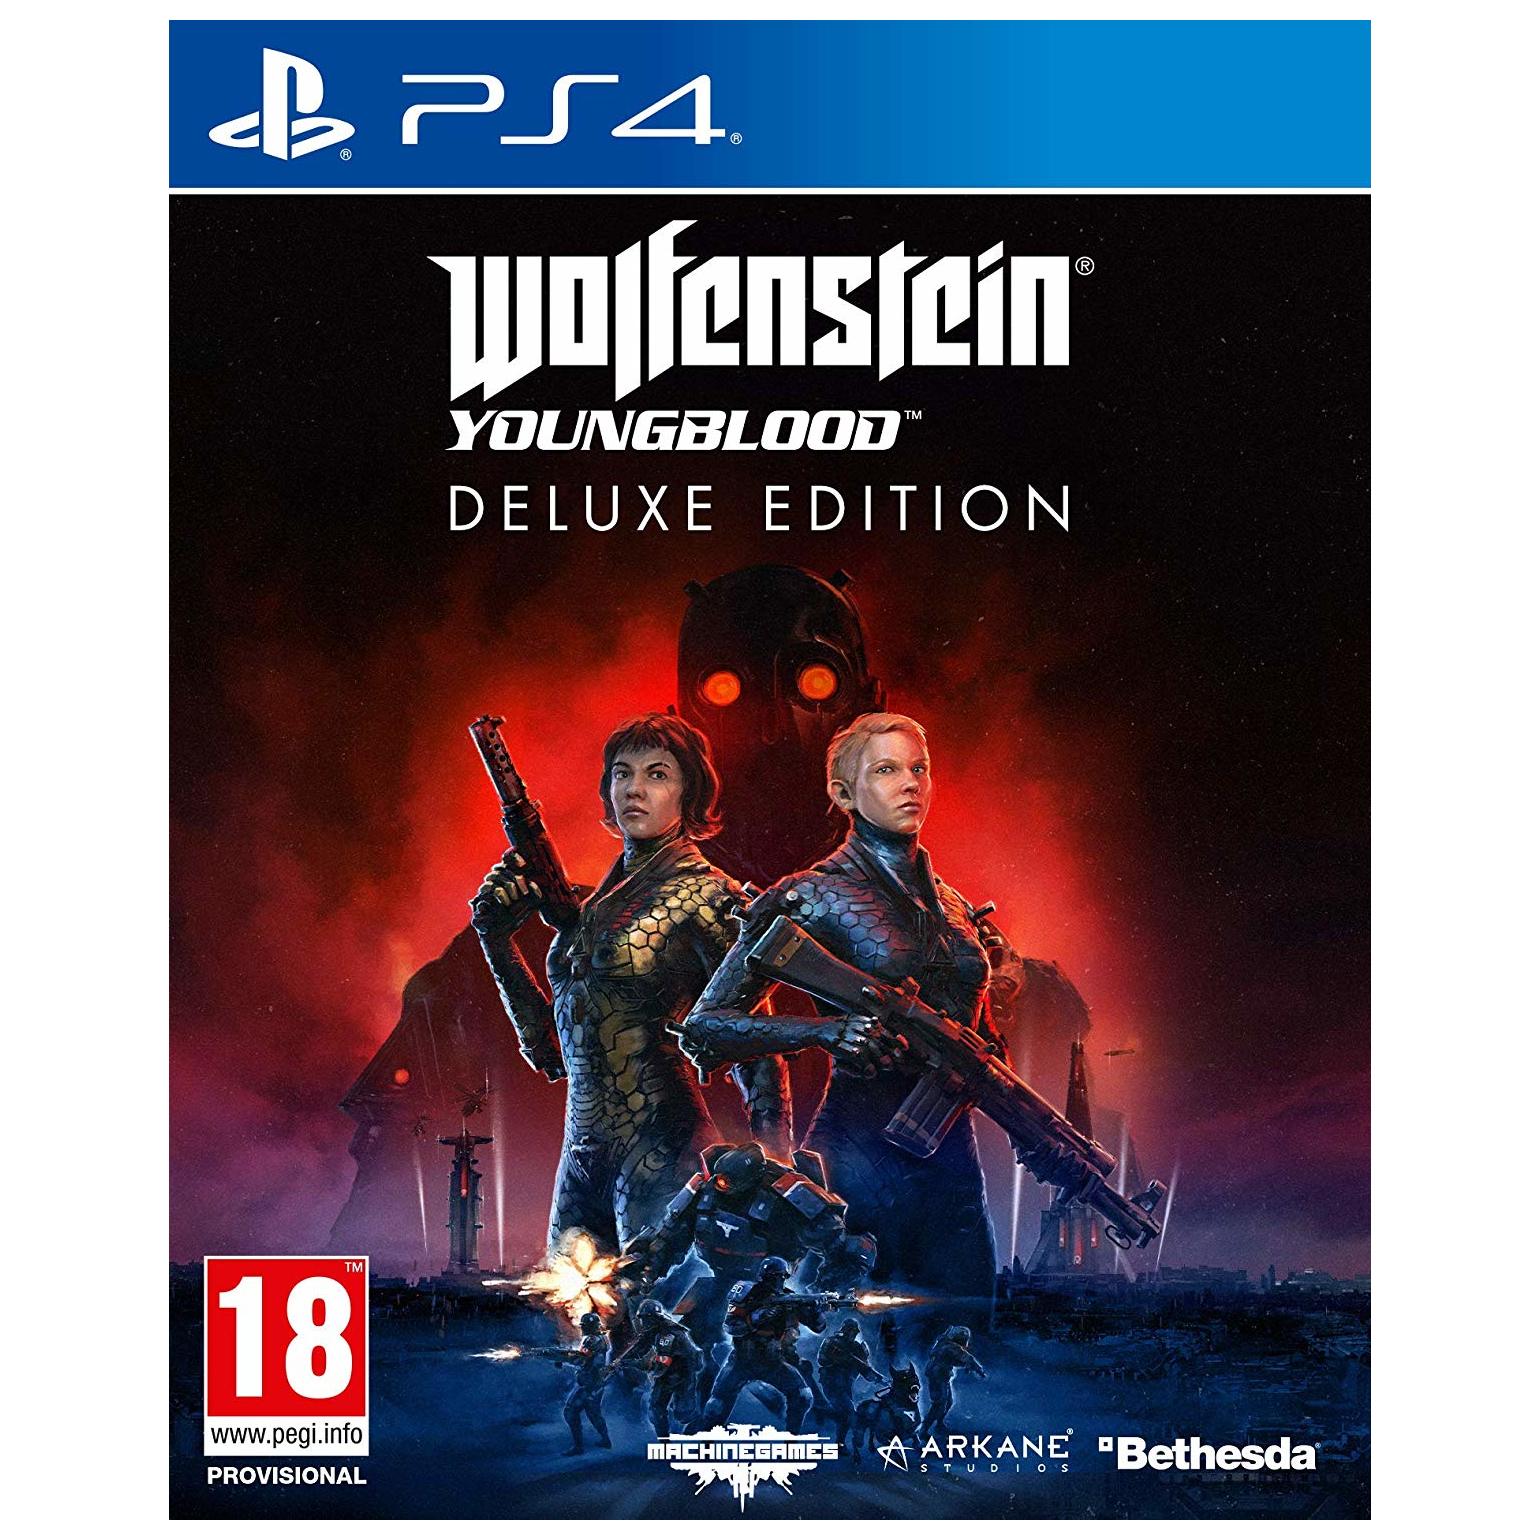 øjenvipper Hæl cabriolet PS4 Wolfenstein Youngblood Deluxe Edition Game price in Bahrain, Buy PS4  Wolfenstein Youngblood Deluxe Edition Game in Bahrain.